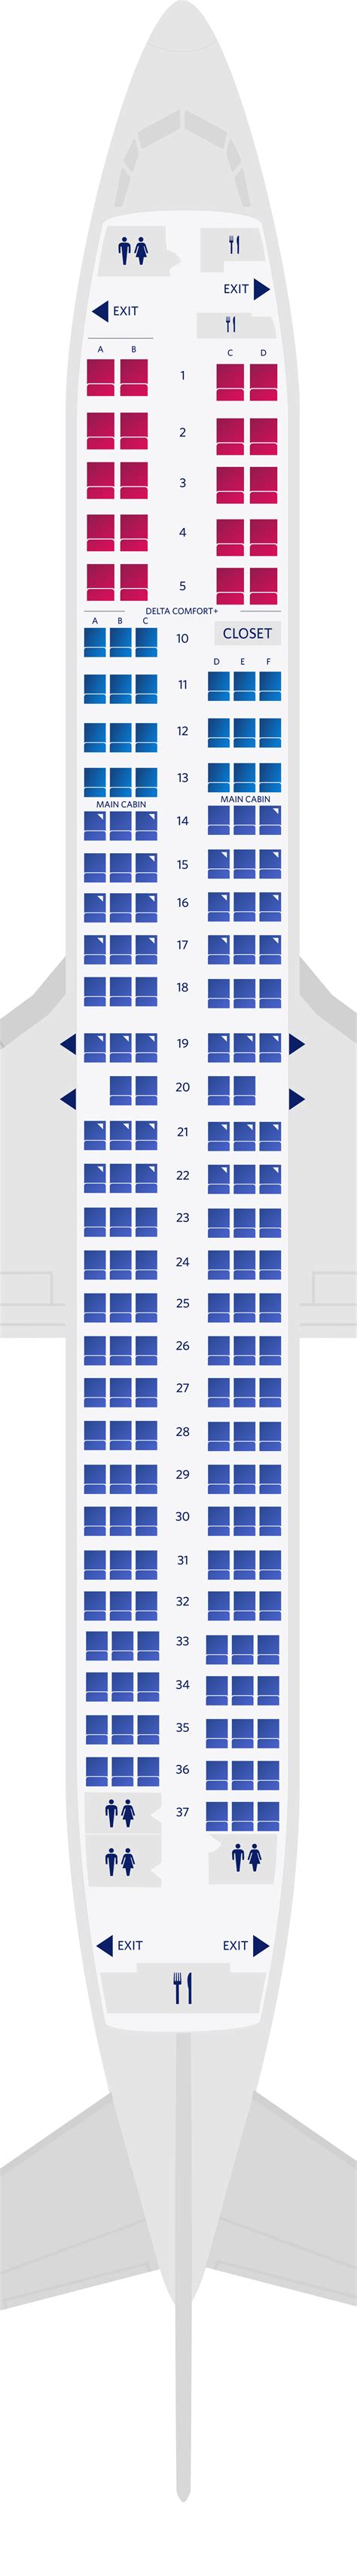 Boeing 737 900 Seating Chart Delta My Bios